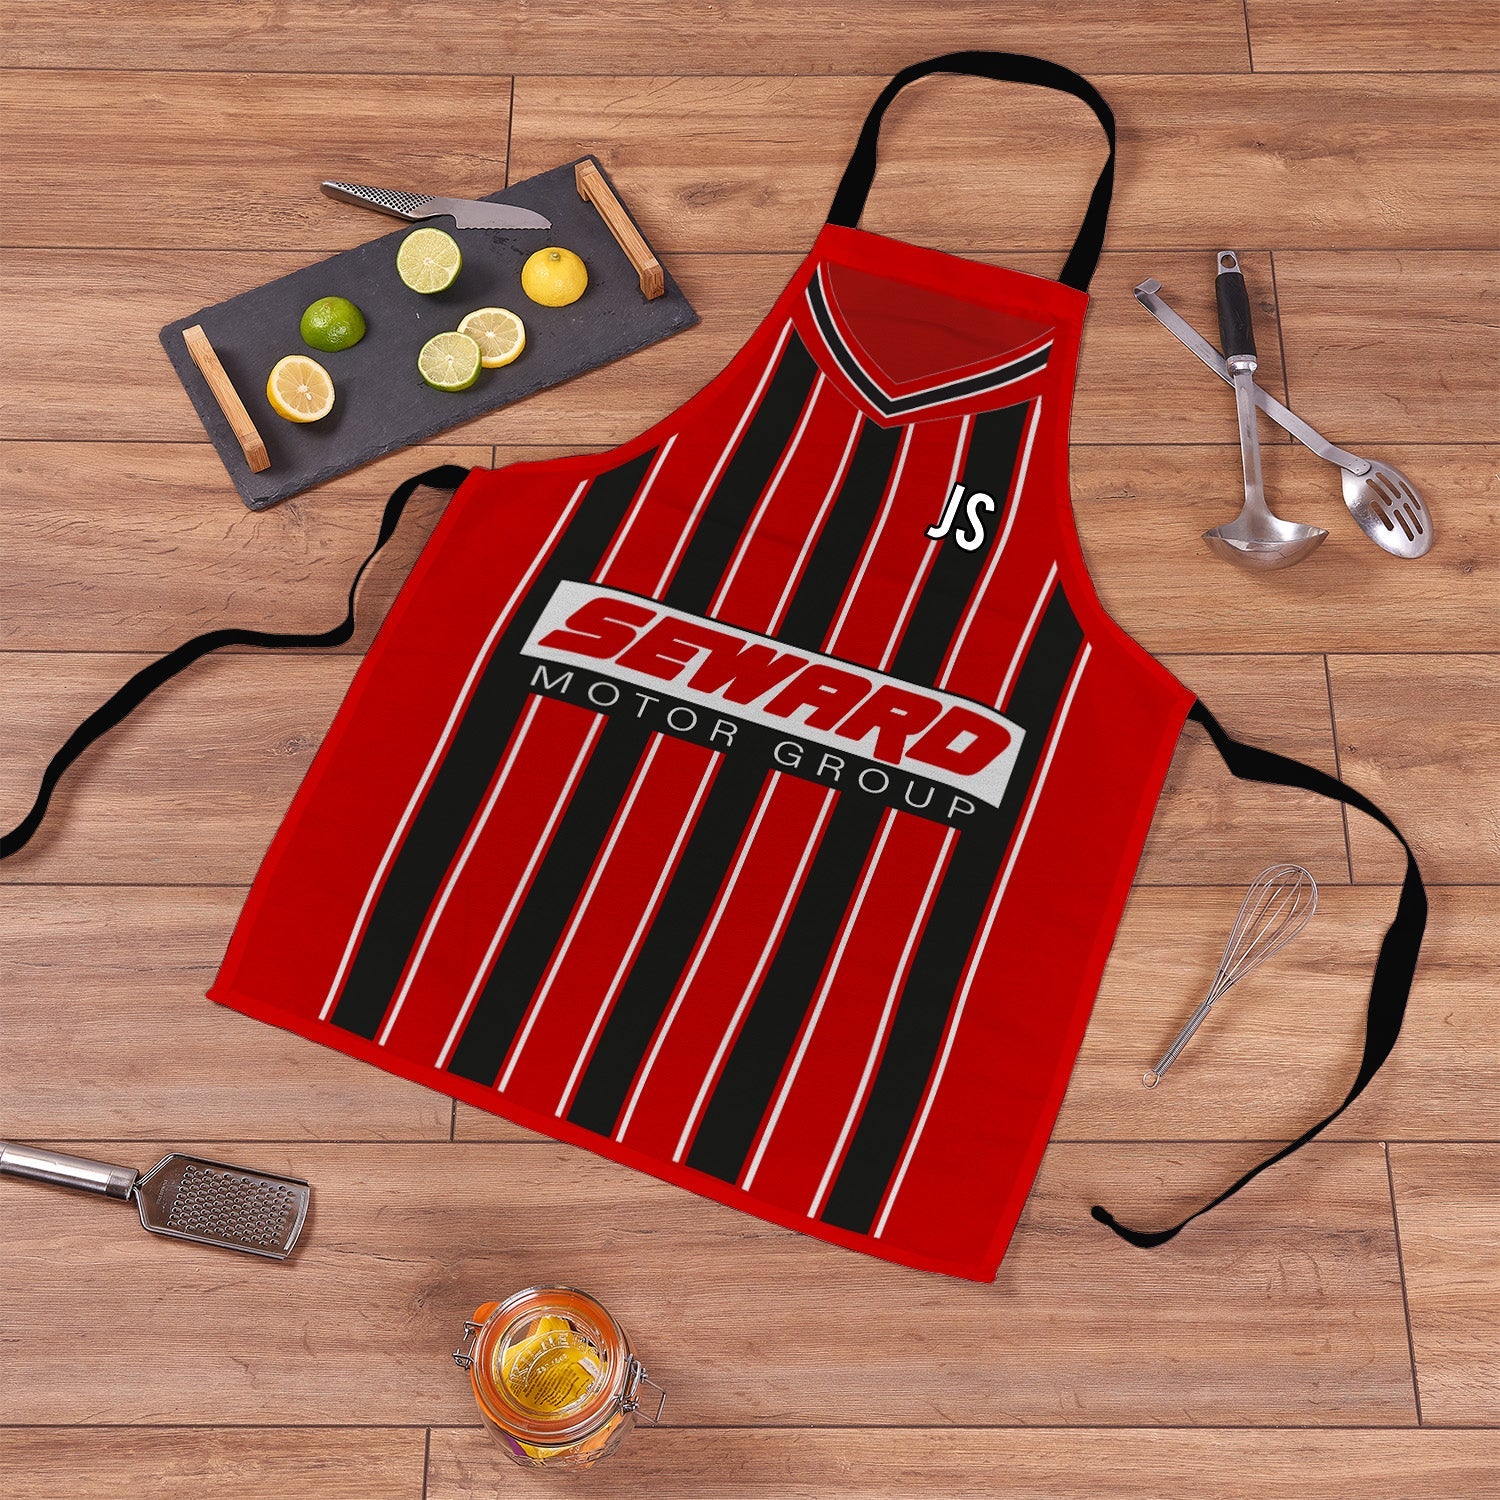 Bournemouth 2001 Home Shirt - Personalised Retro Football Novelty Water-Resistant, Lazer Cut (no fraying) Light Weight Adults Apron